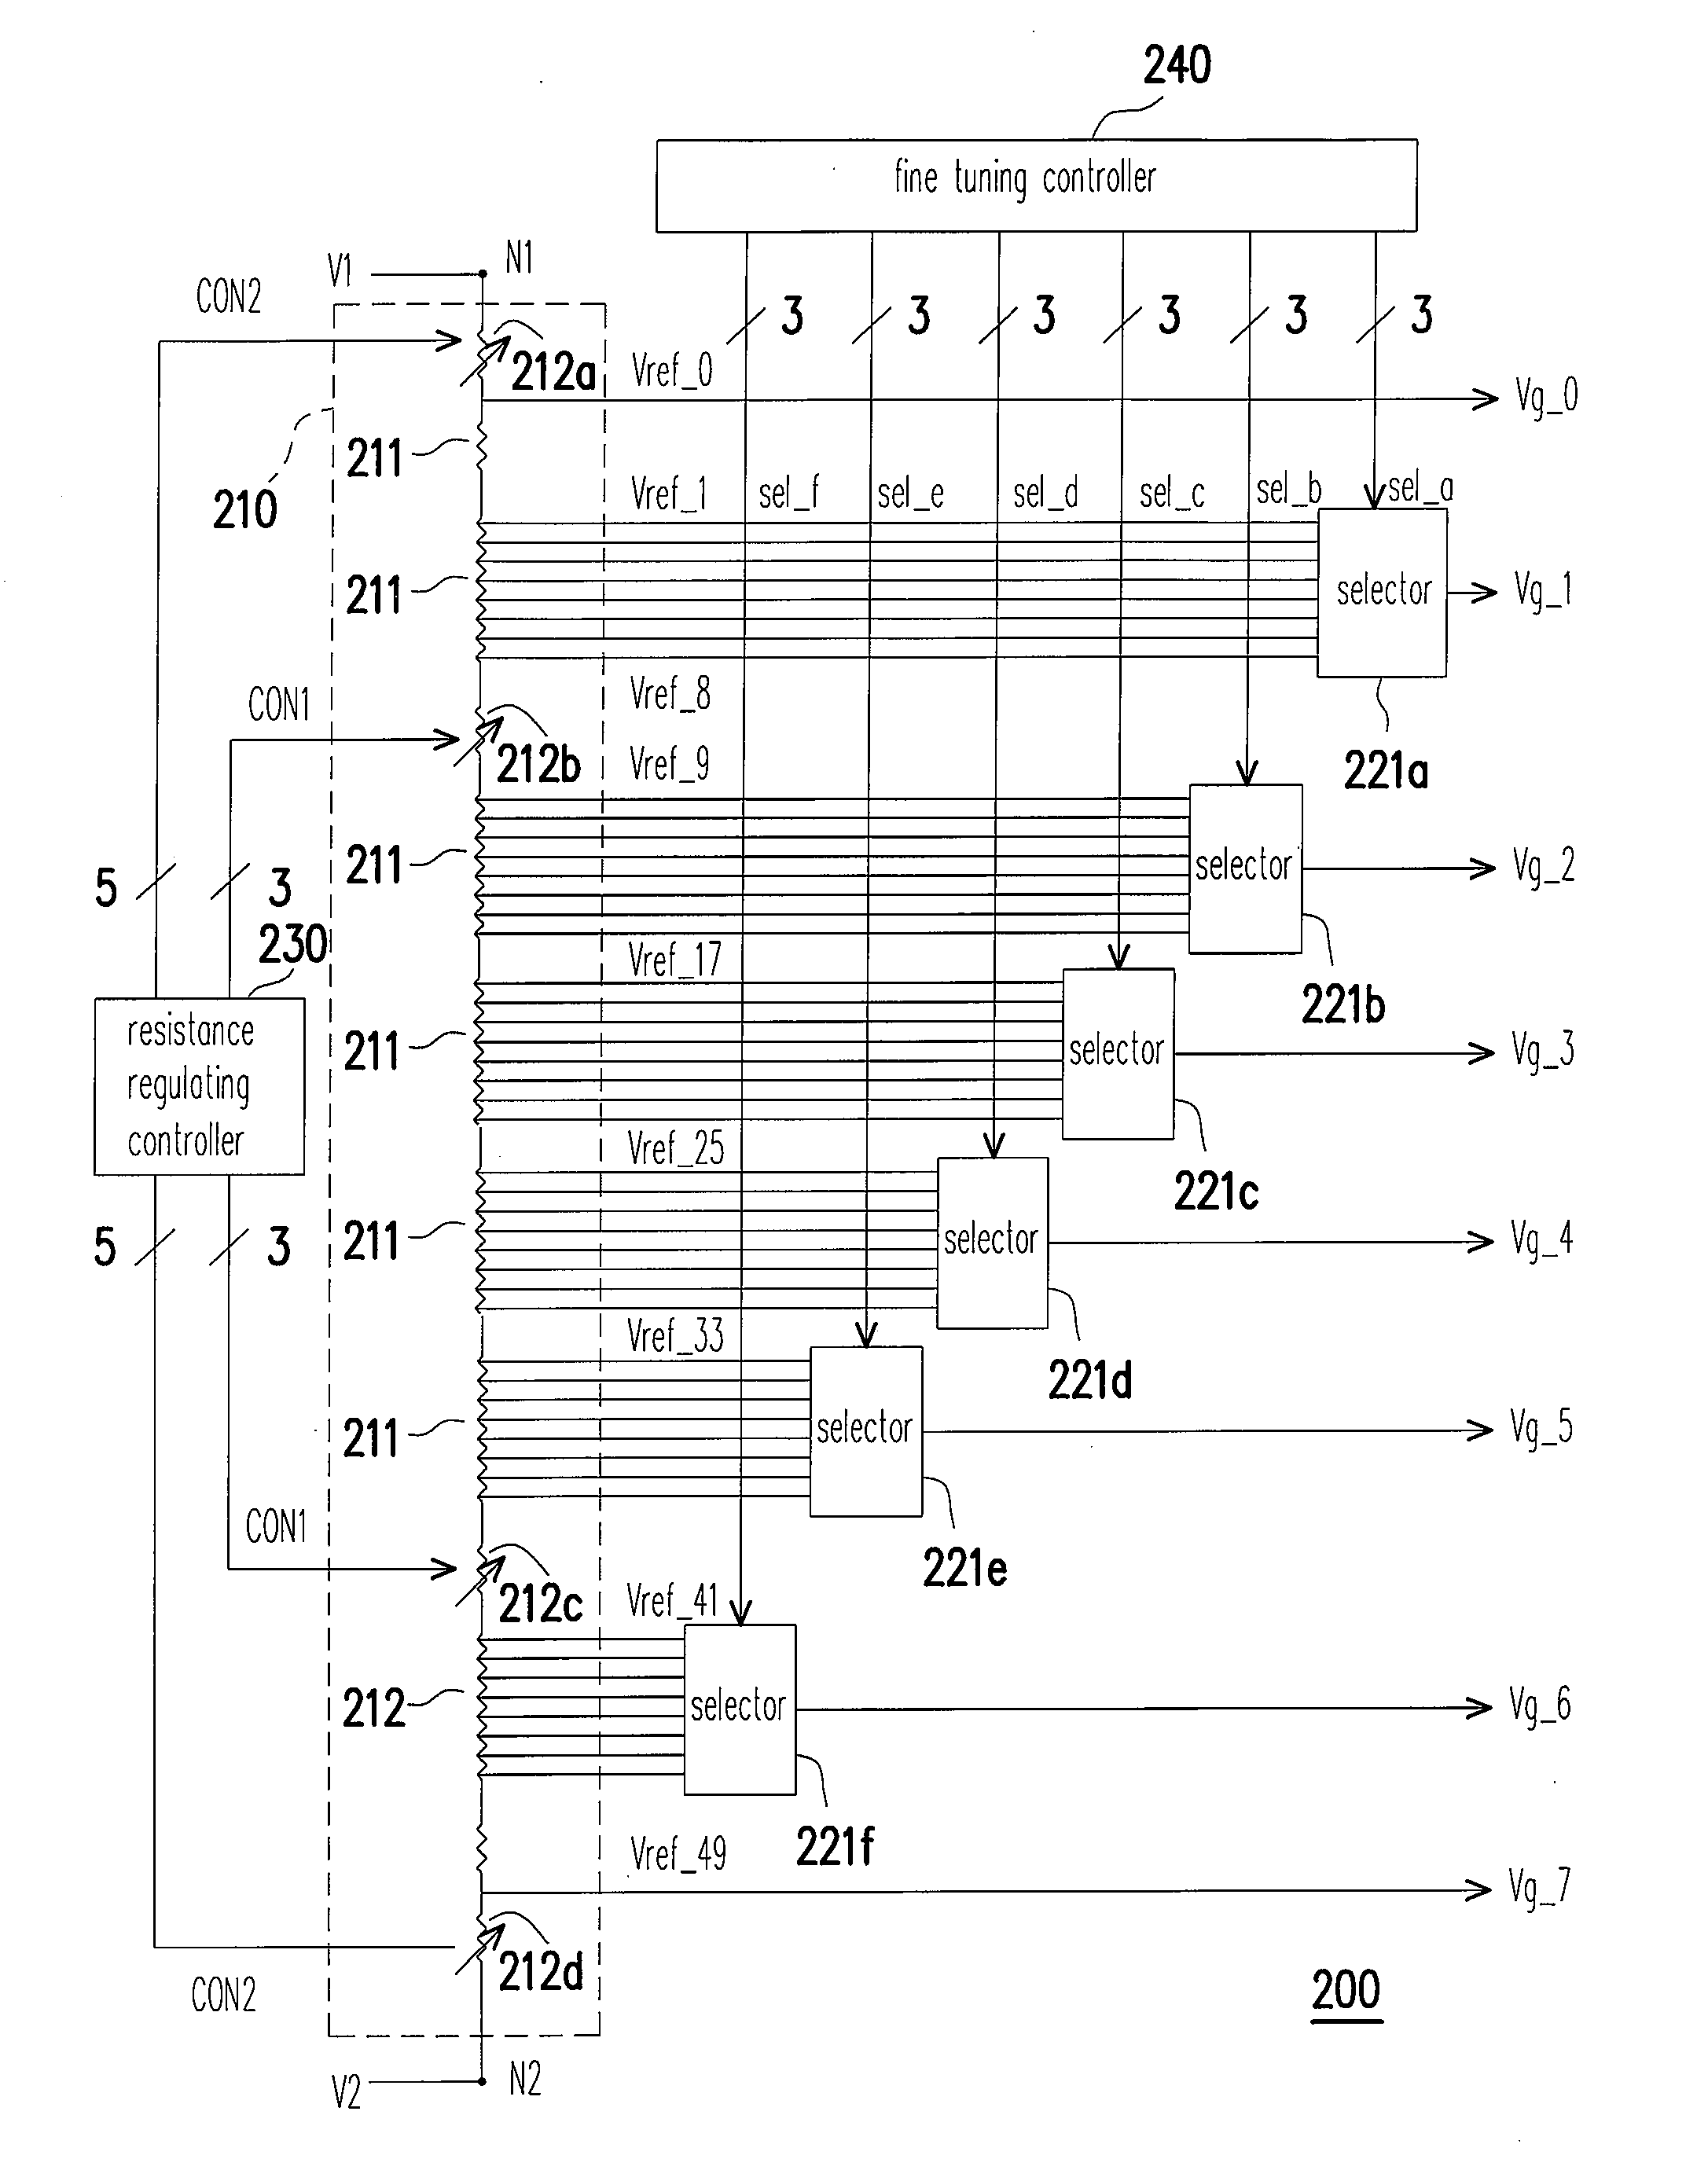 Gamma reference voltage generating device and gamma voltage generating device